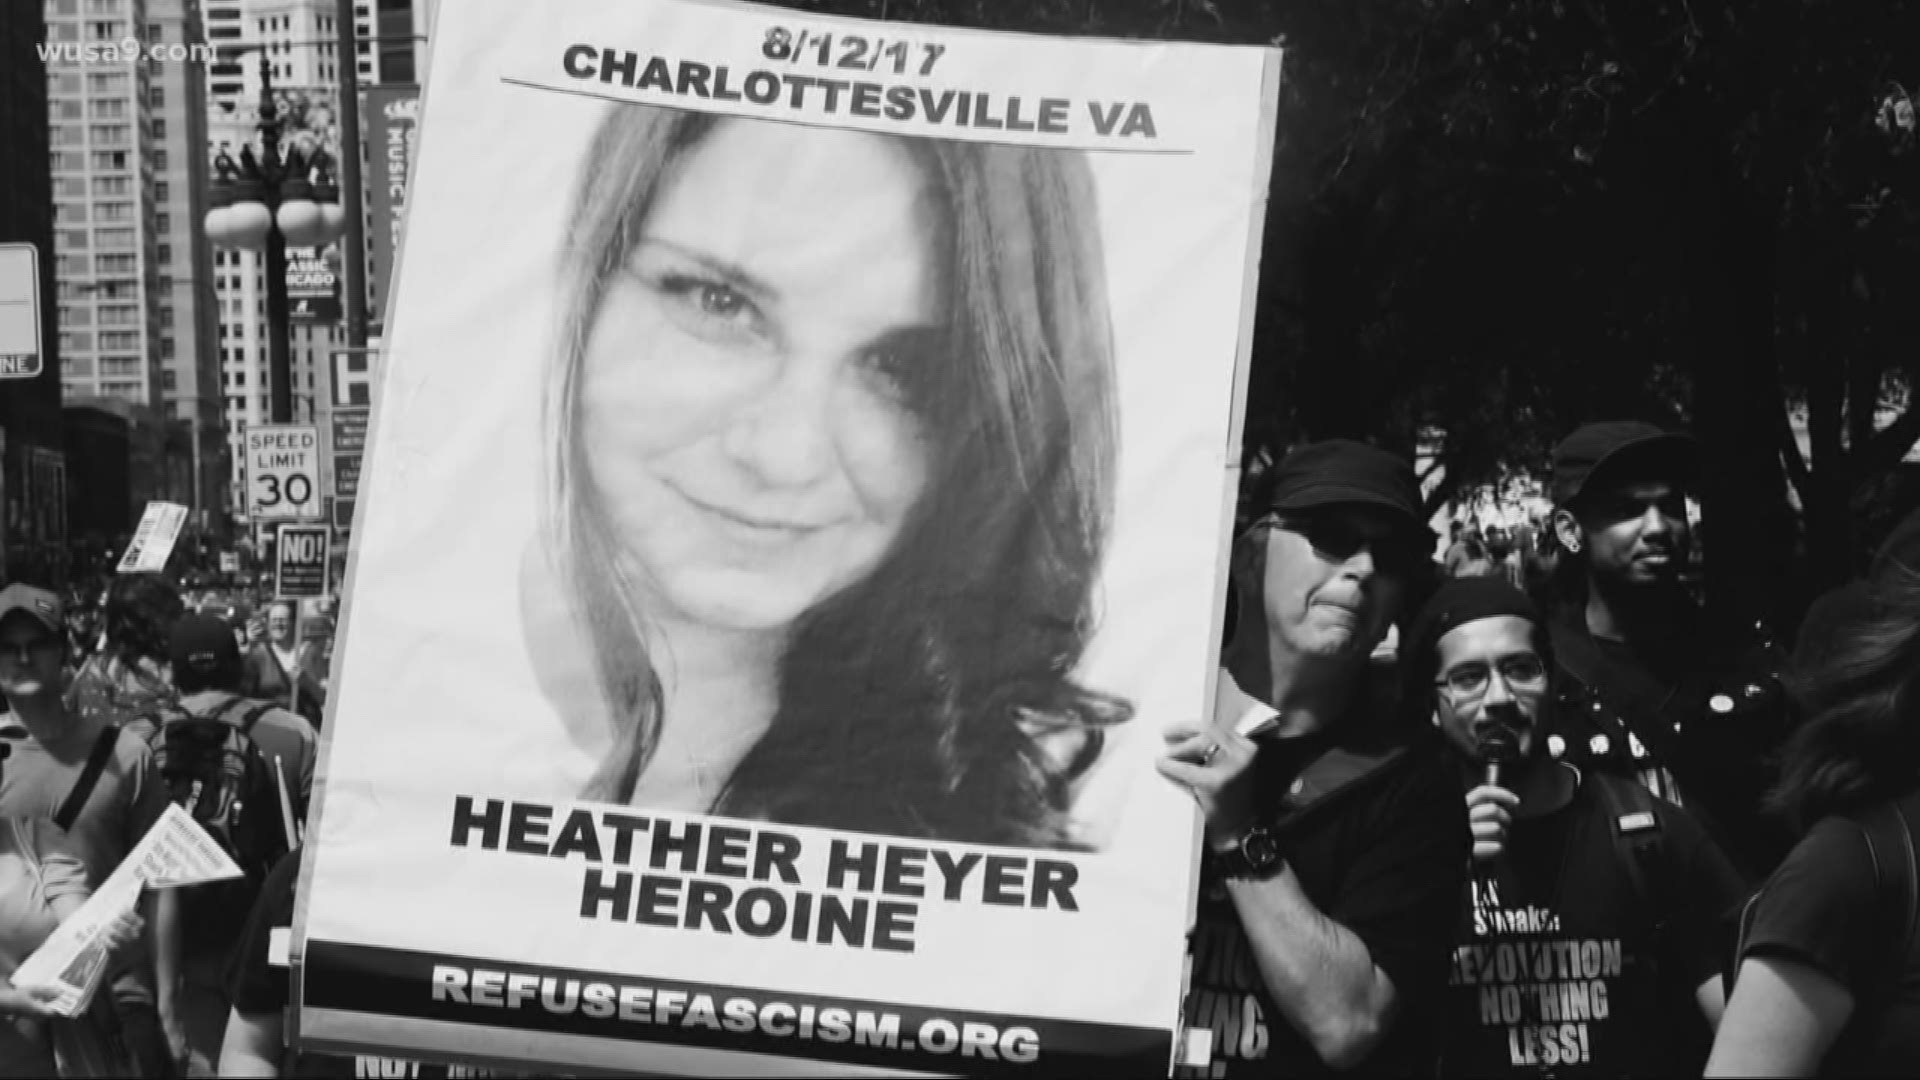 The white supremacist who killed her daughter will spend the rest of his life in jail. She’s spending hers fighting fake news.